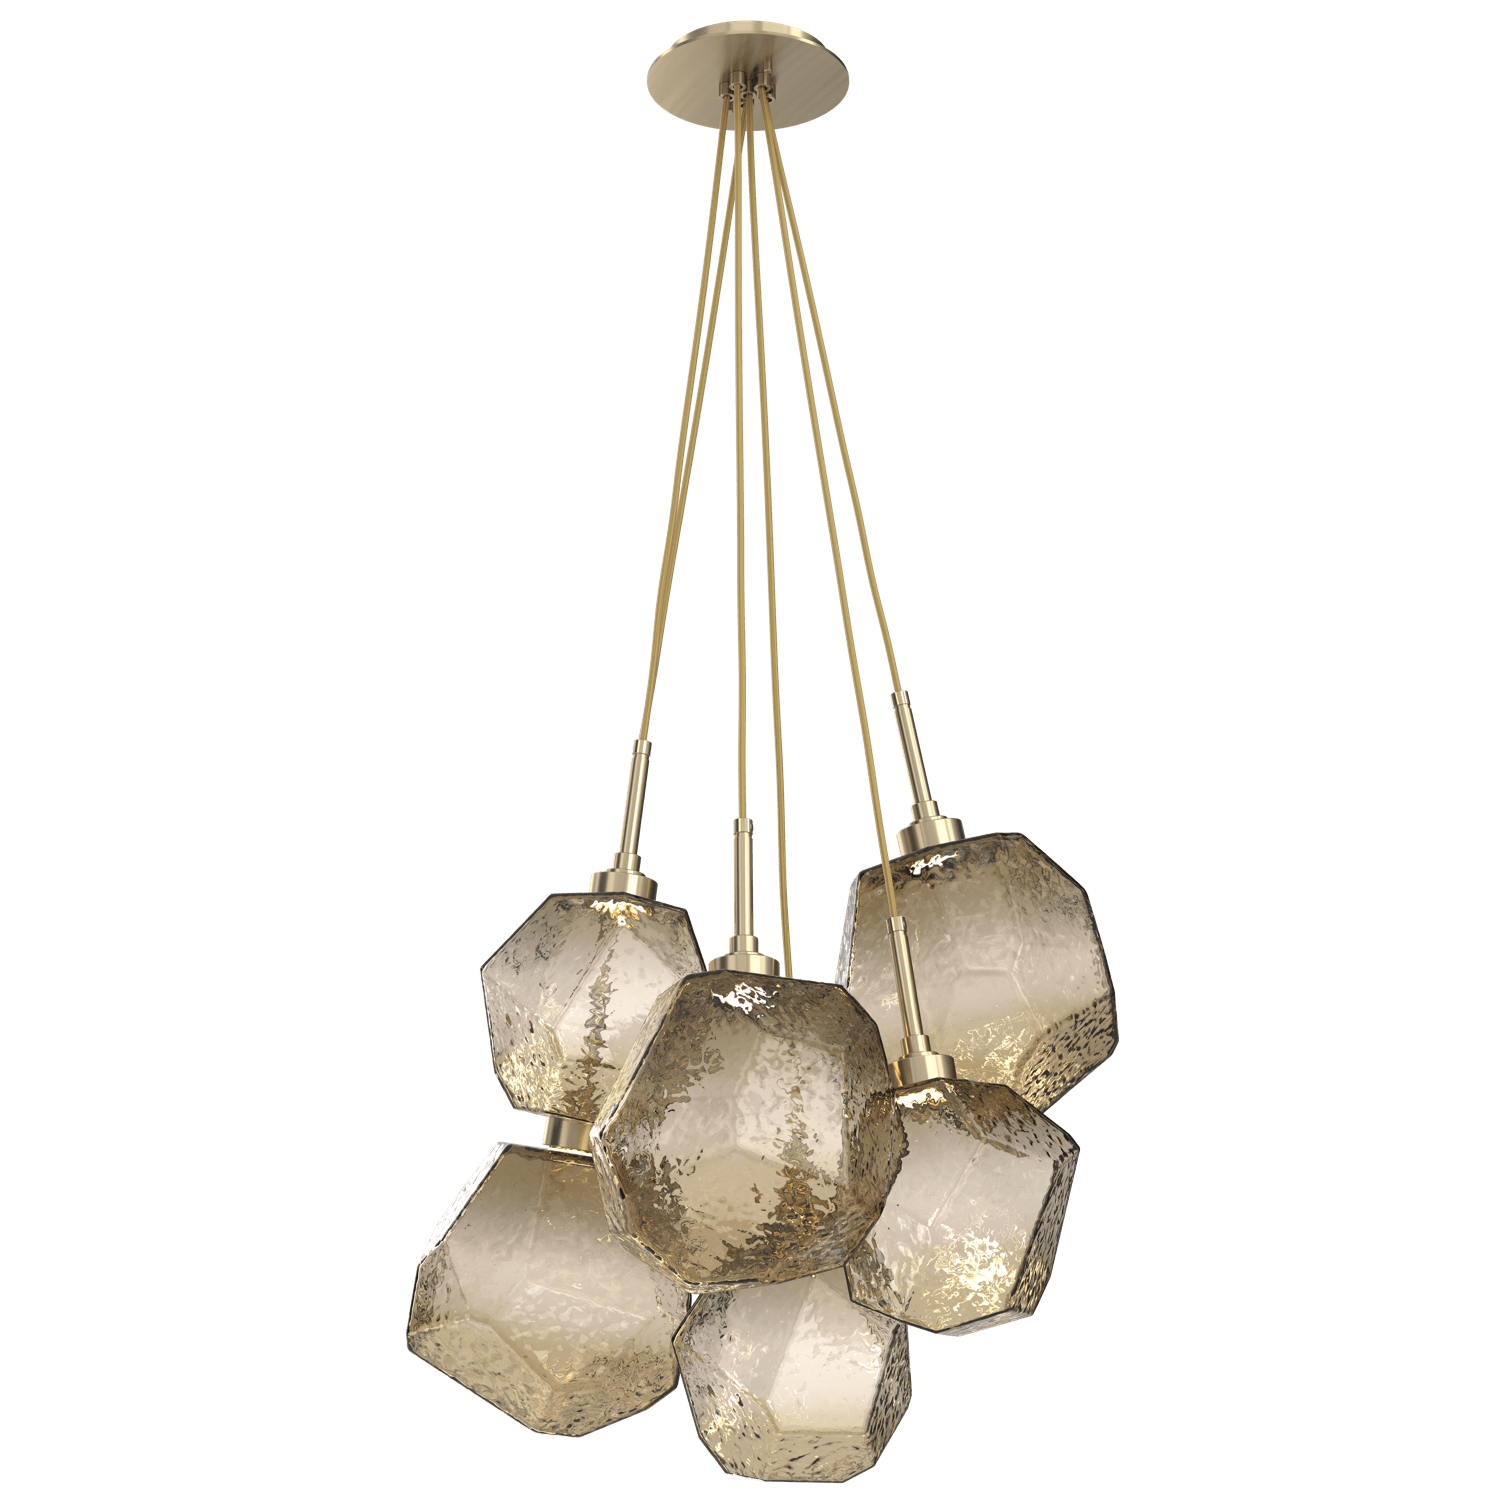 CHB0039-0F-HB-B-Hammerton-Studio-Gem-6-light-cluster-pendant-light-with-heritage-brass-finish-and-bronze-blown-glass-shades-and-LED-lamping